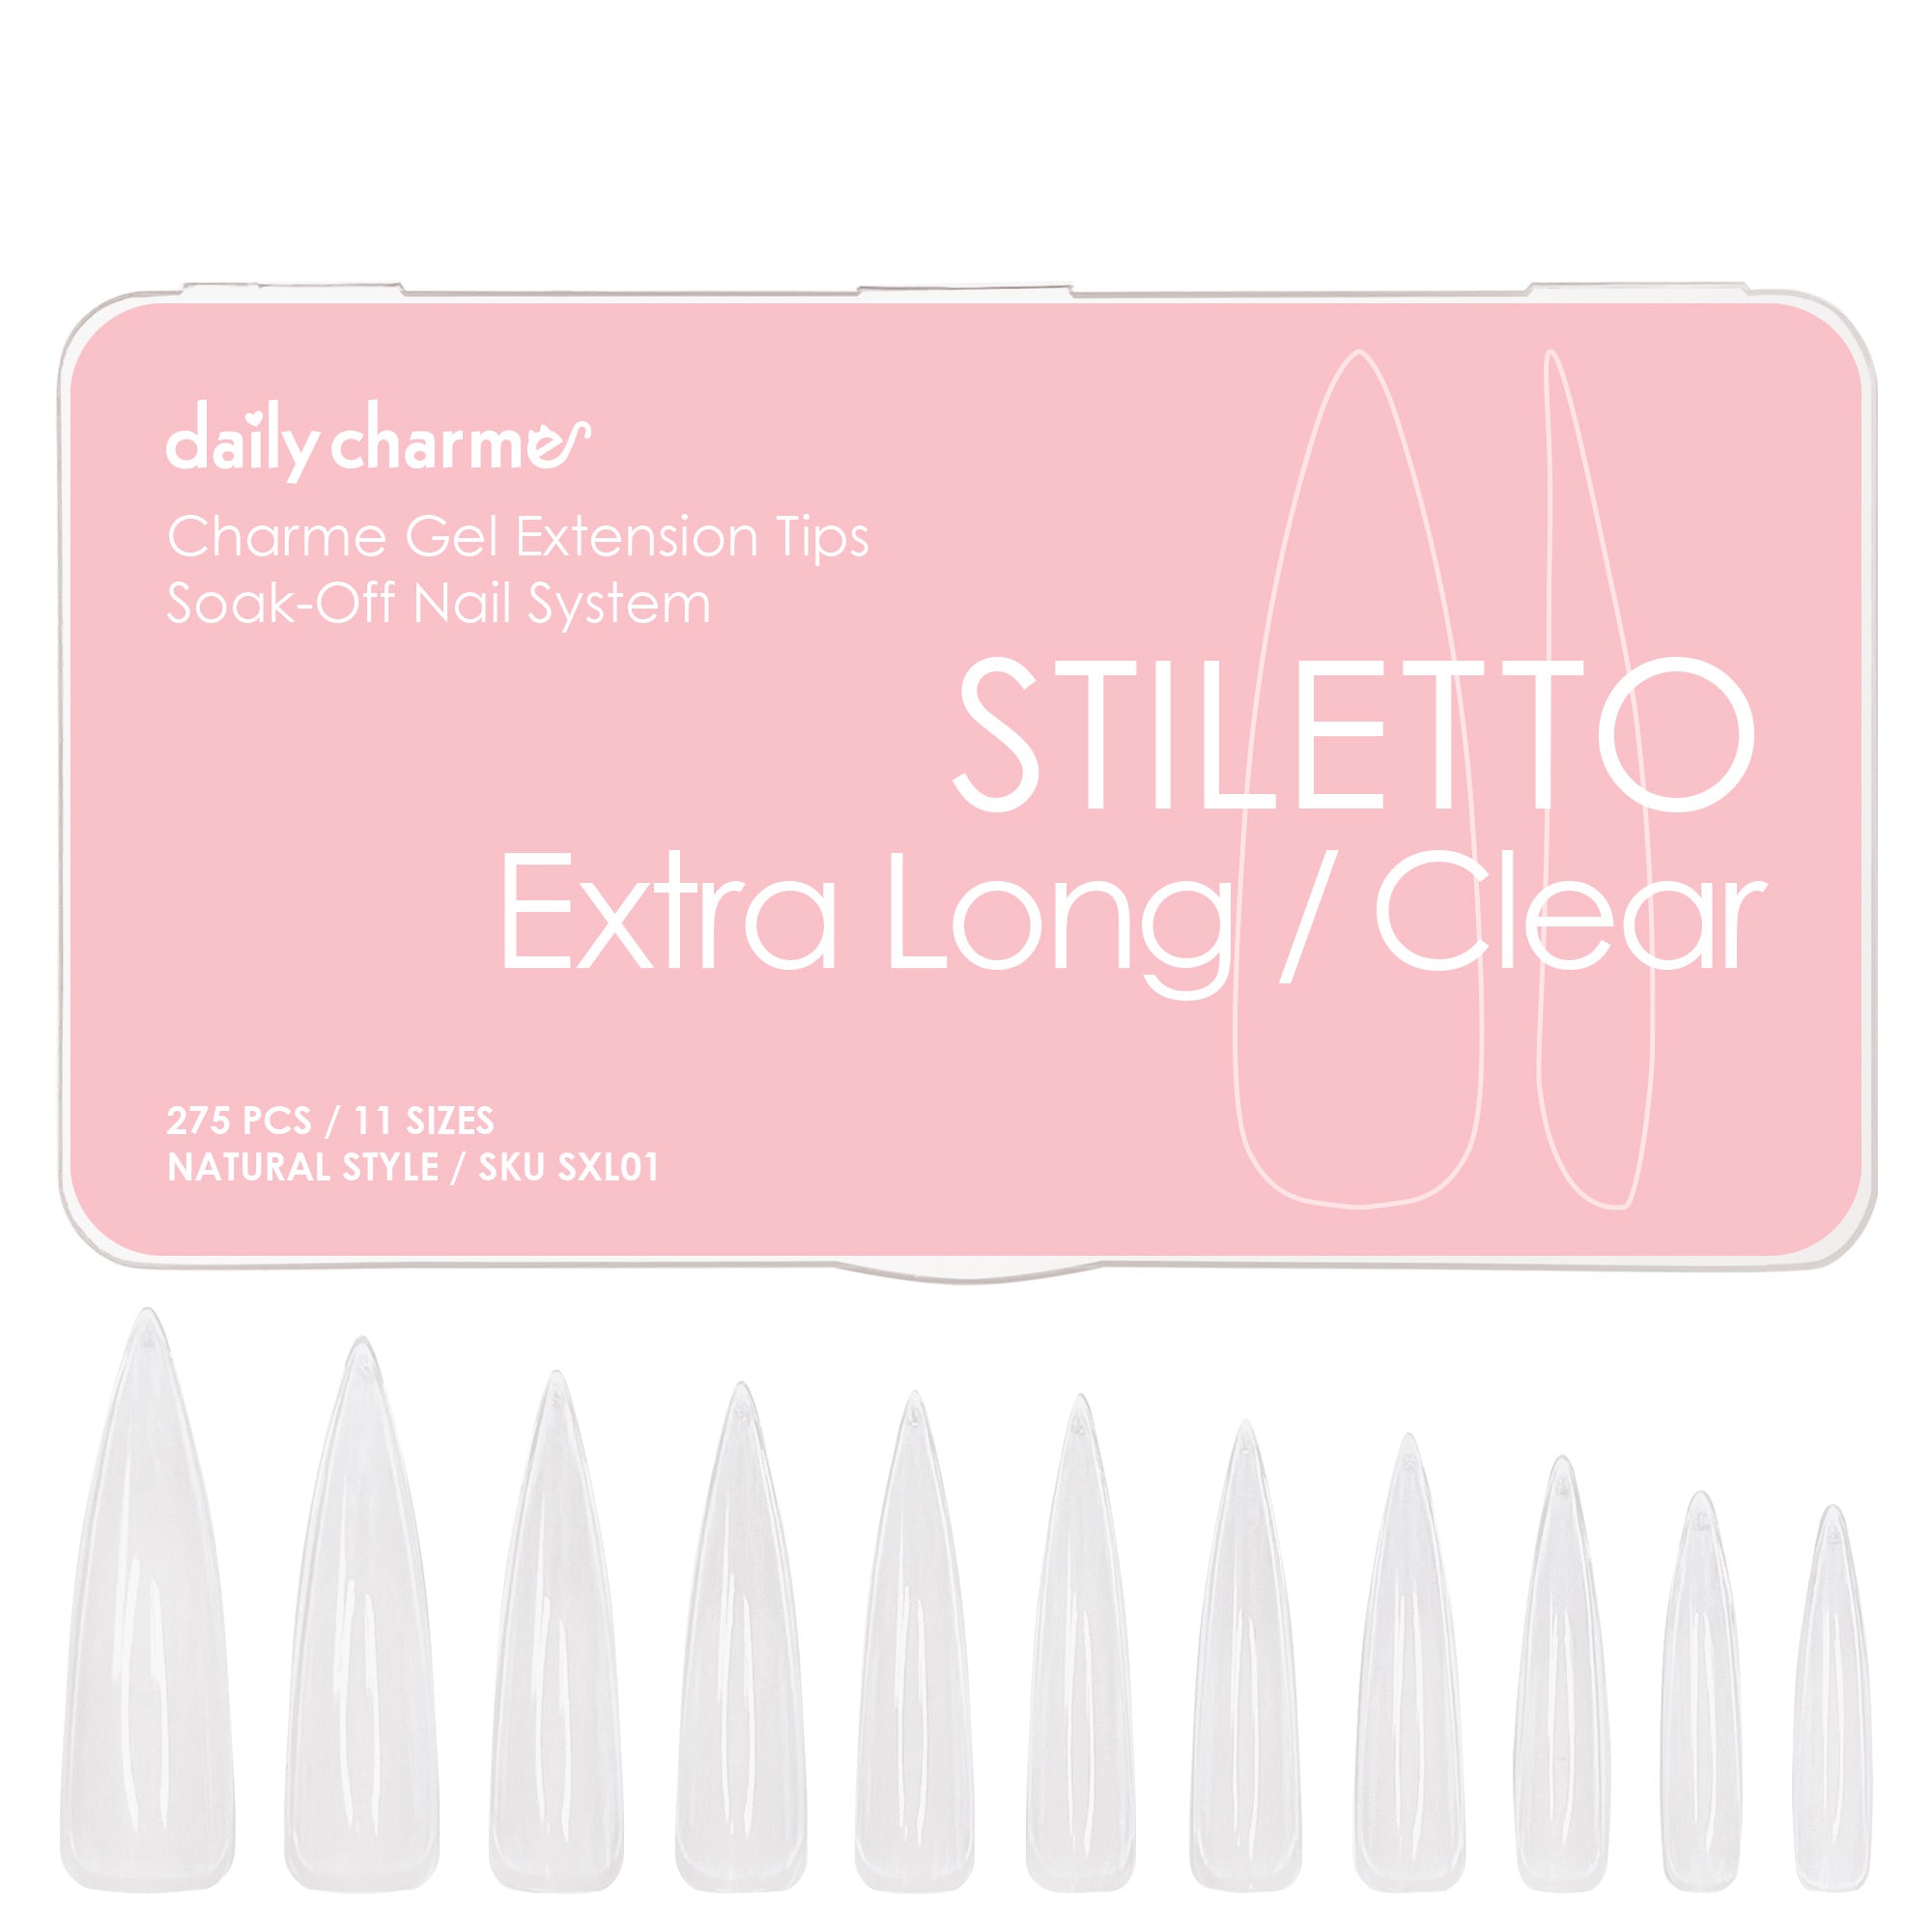 Charme Gel Extension Tips / Stiletto / Extra Long / Clear Gel X Nail